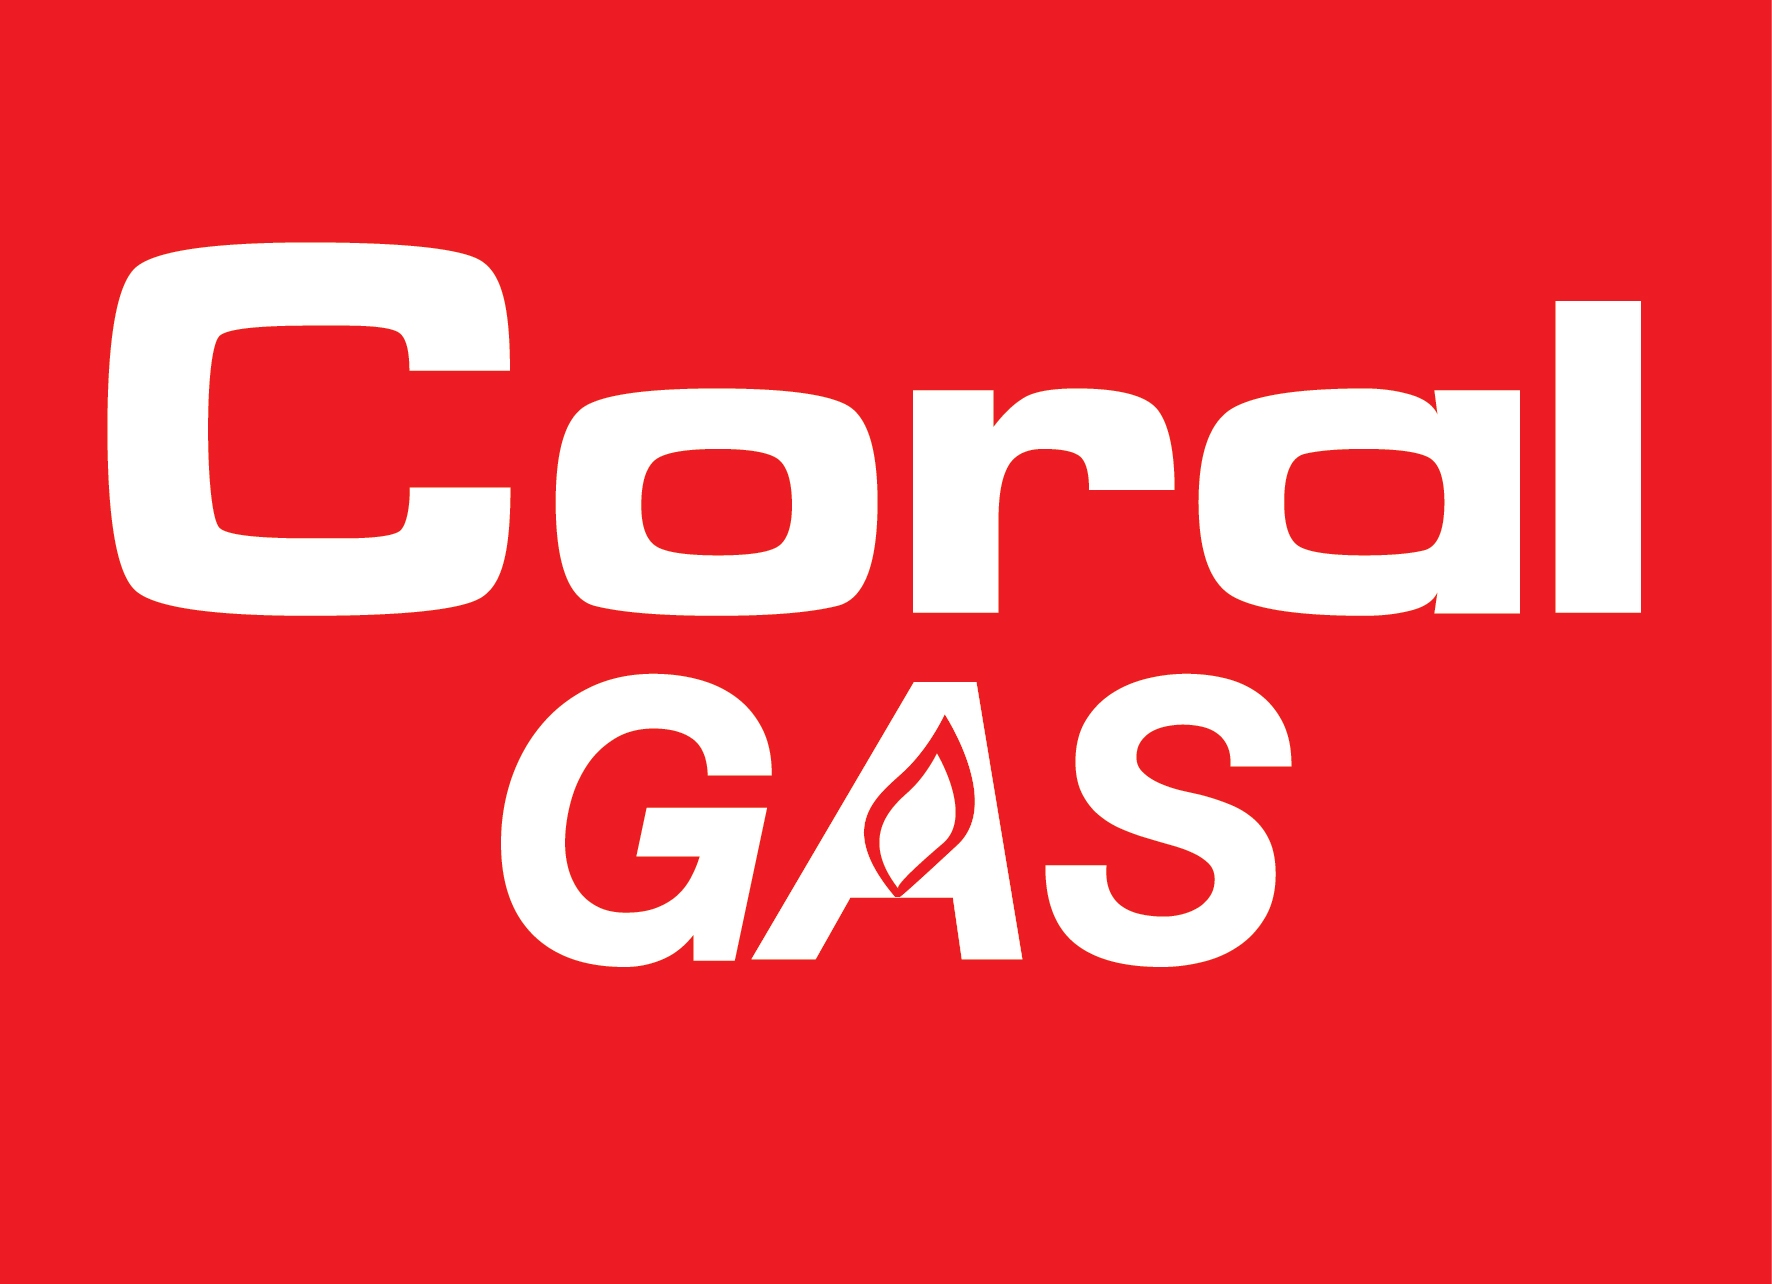 Coral gas